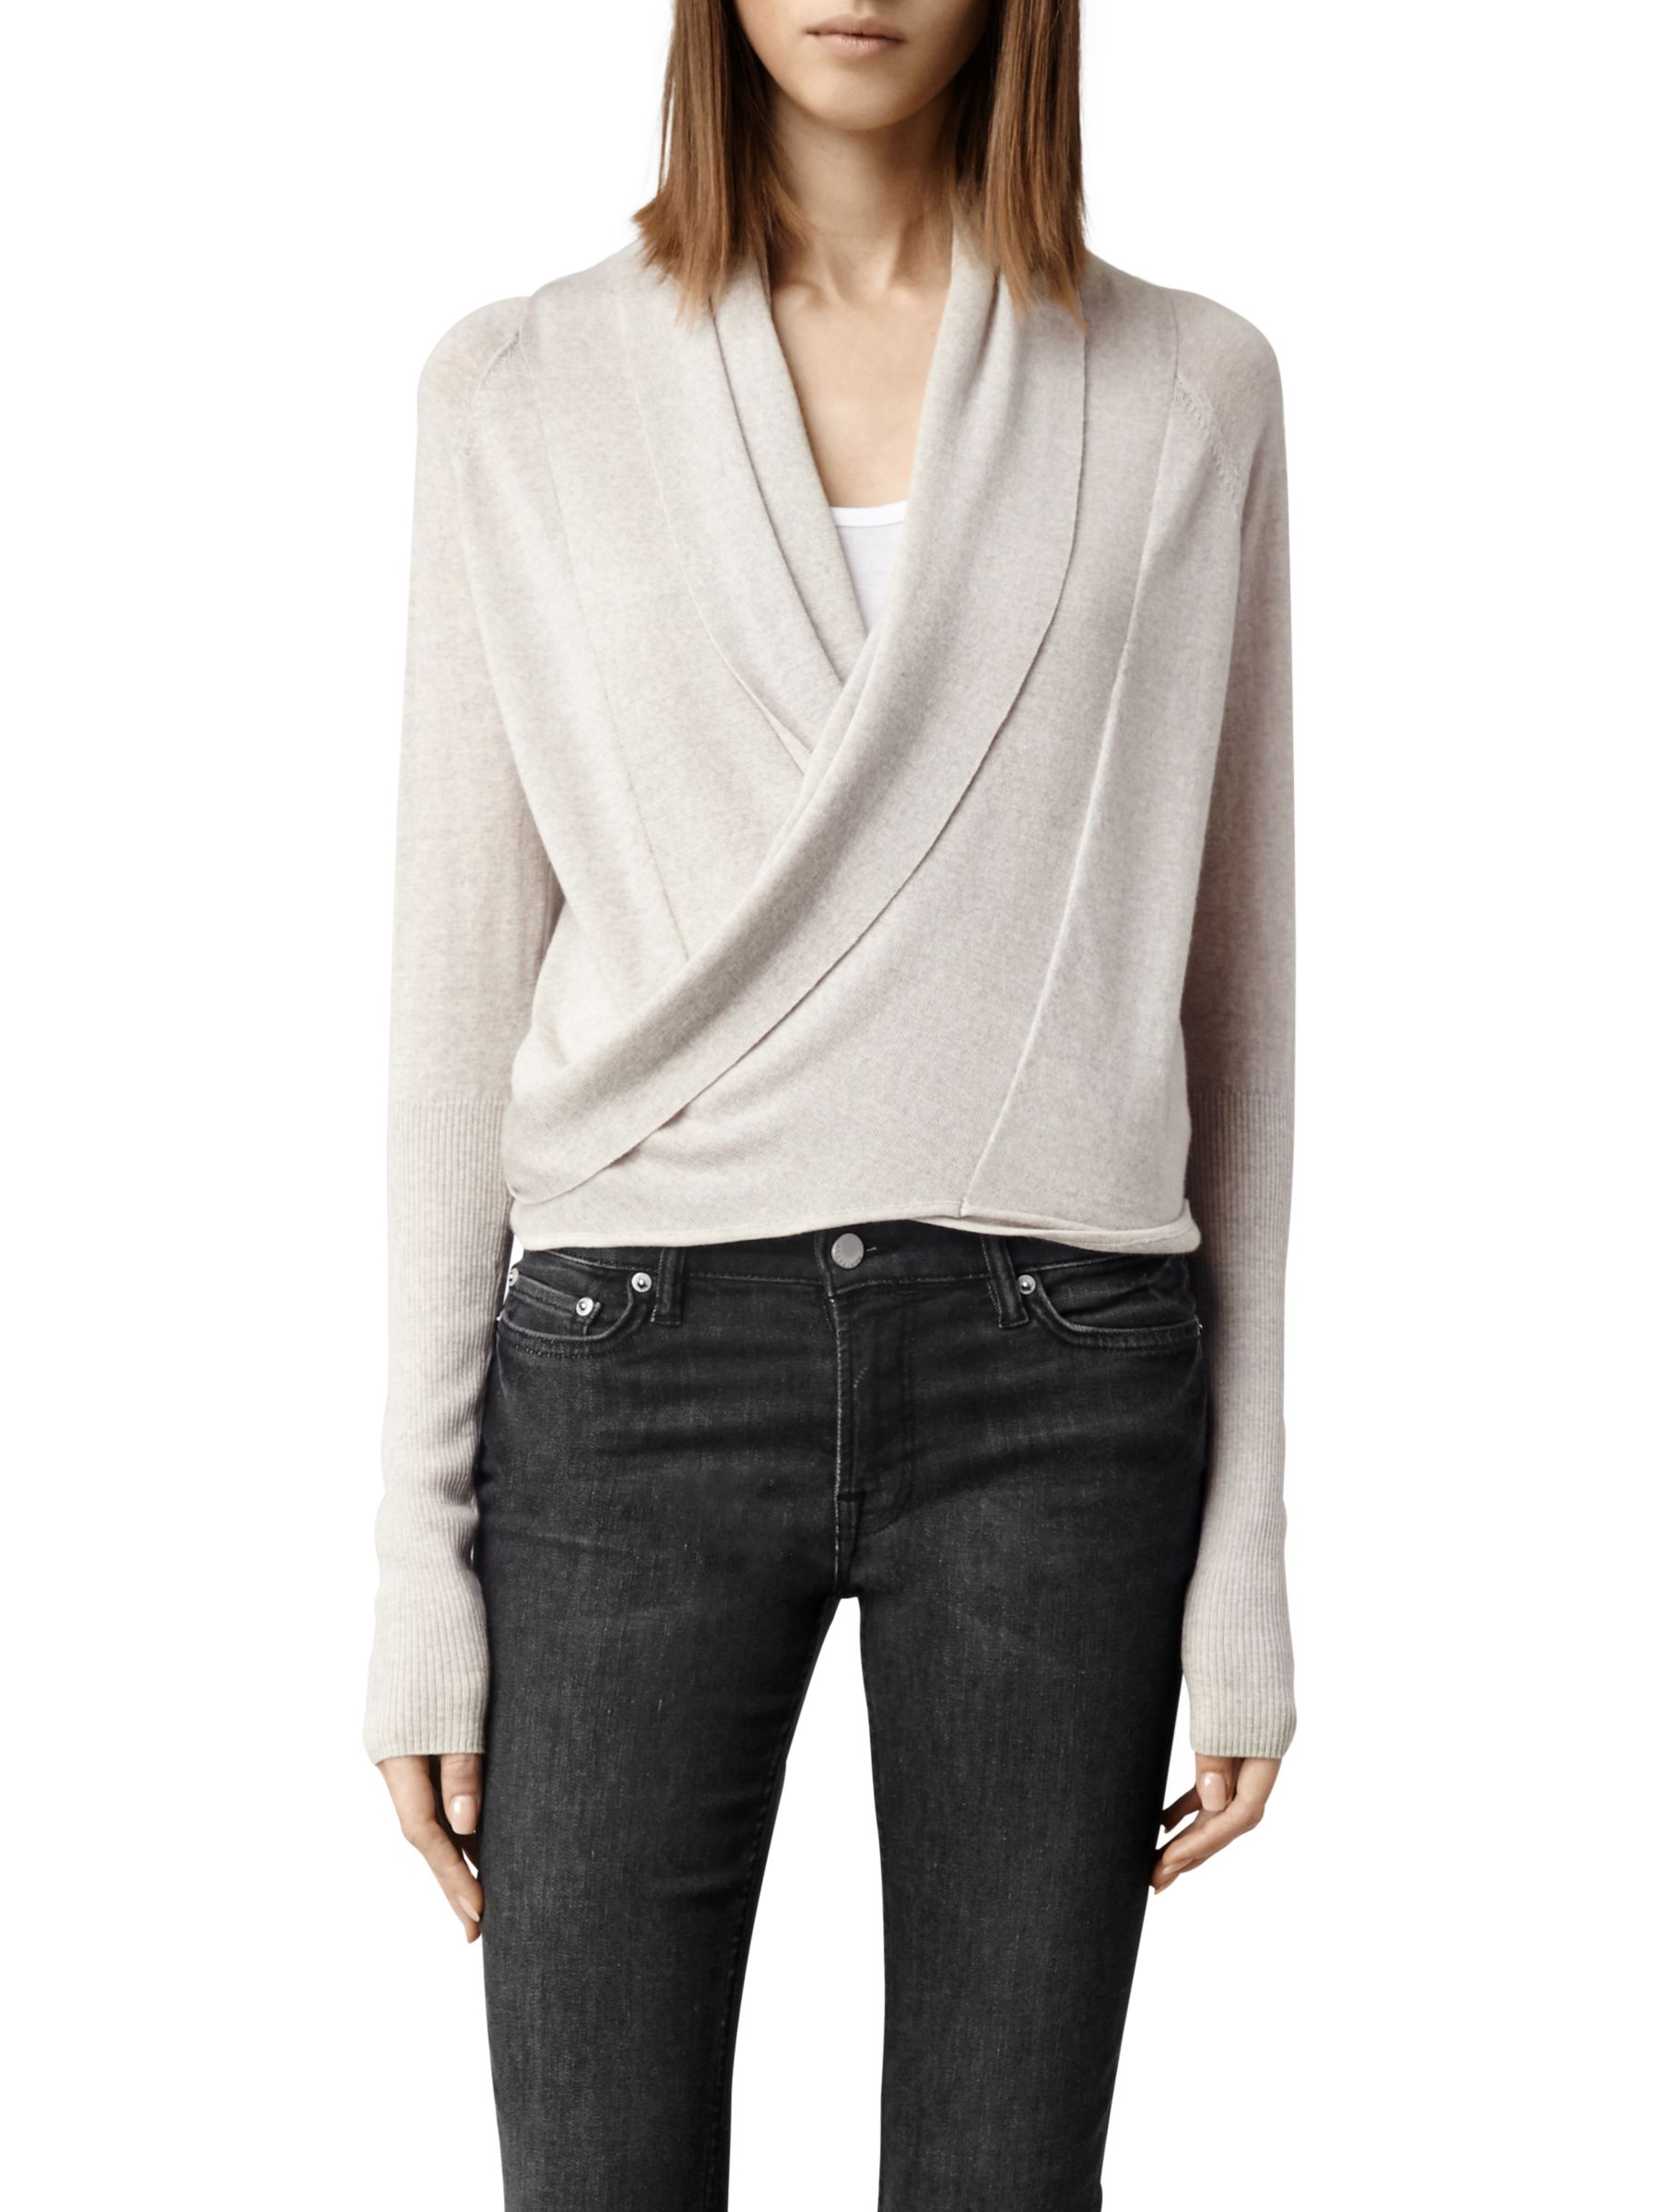 AllSaints Wasson Pirate Cardigan, Oyster